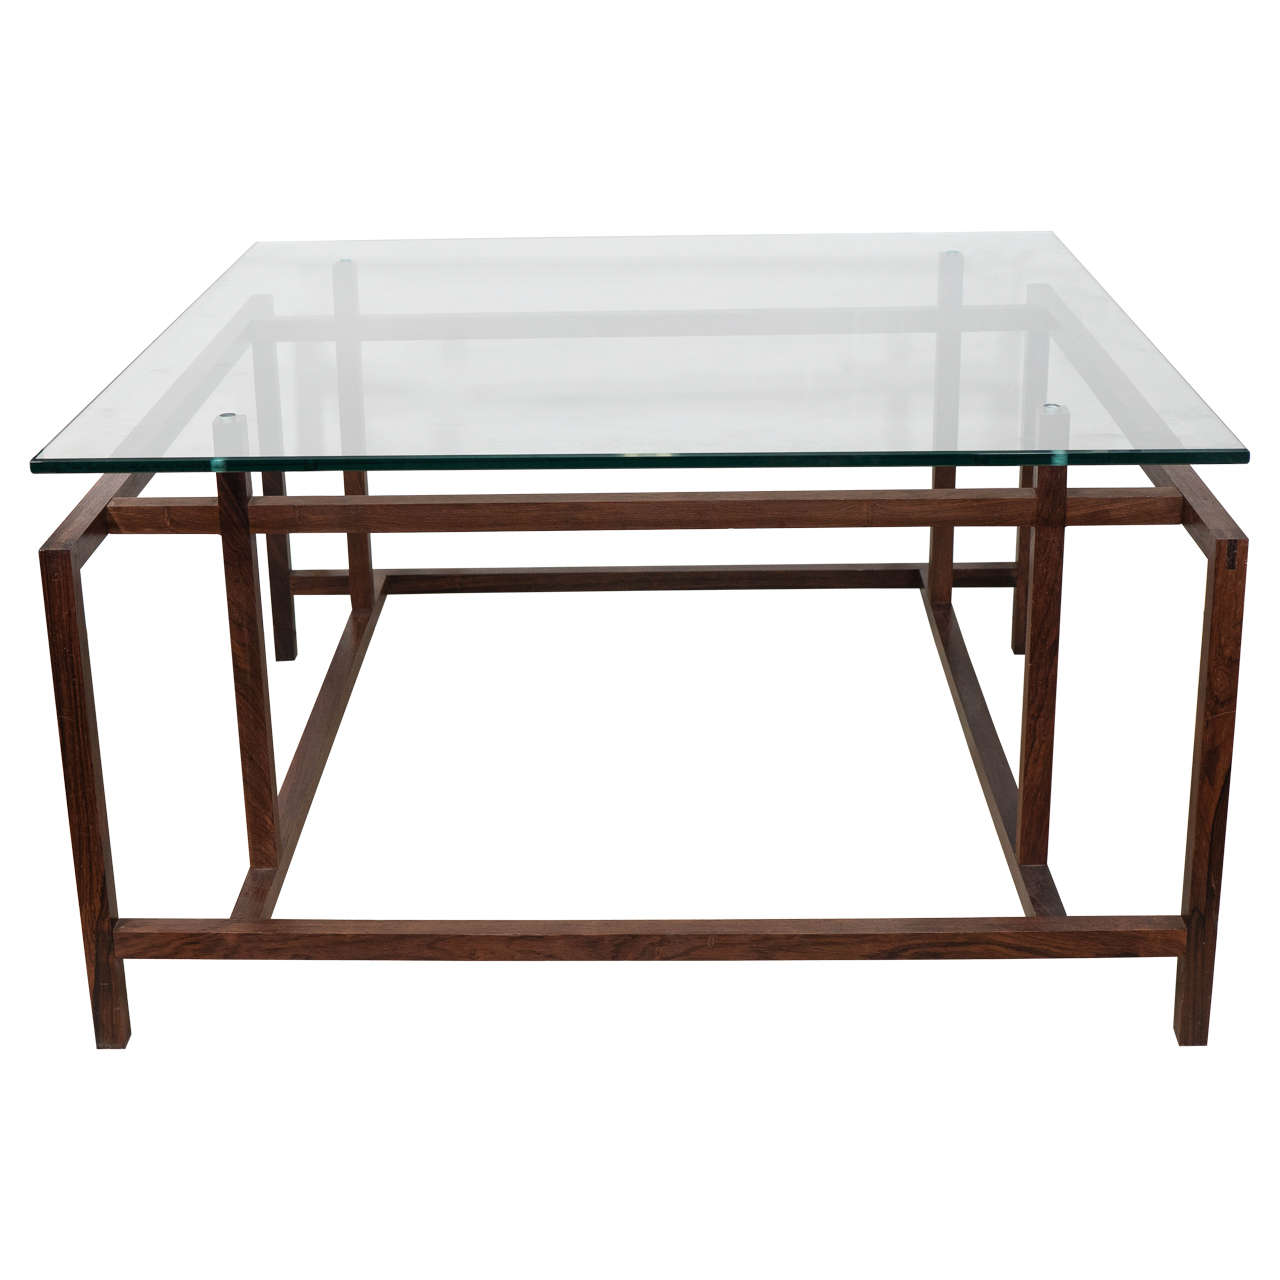 Henning Norgaard Modern Rosewood Coffee Table with Glass Top for Komfort